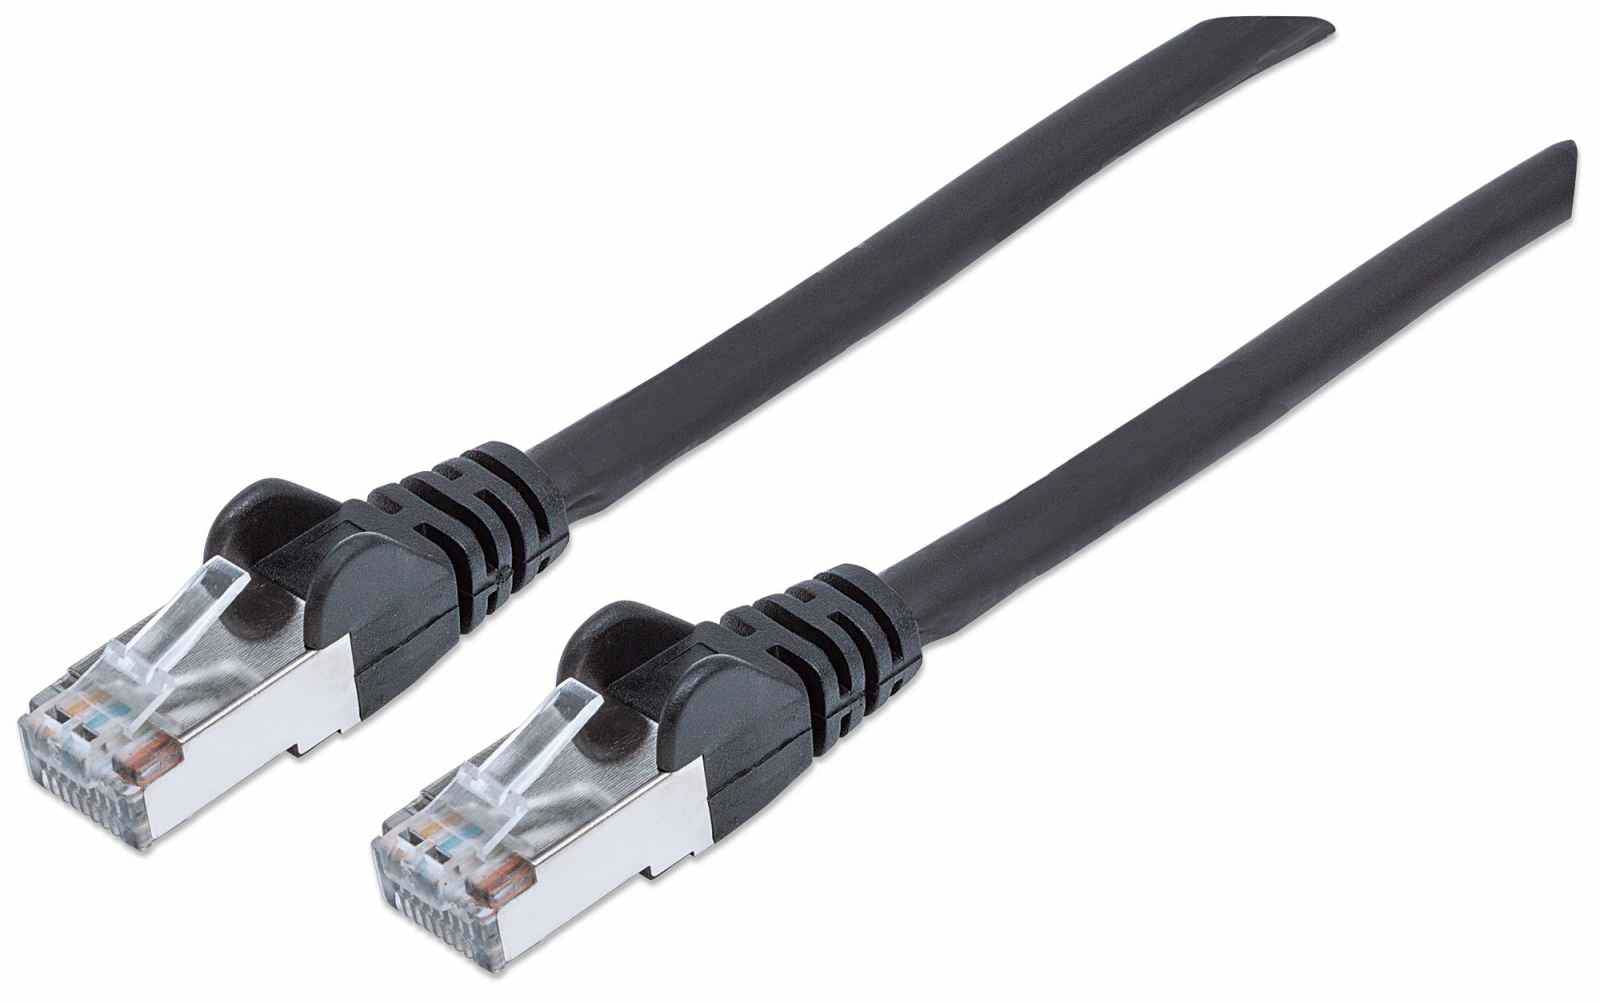 Intellinet Network Patch Cable, Cat7 Cable/Cat6A Plugs, 0.5m, Black, Copper, S/FTP, LSOH / LSZH, PVC, RJ45, Gold Plated Contacts, Snagless, Booted, Lifetime Warranty, Polybag